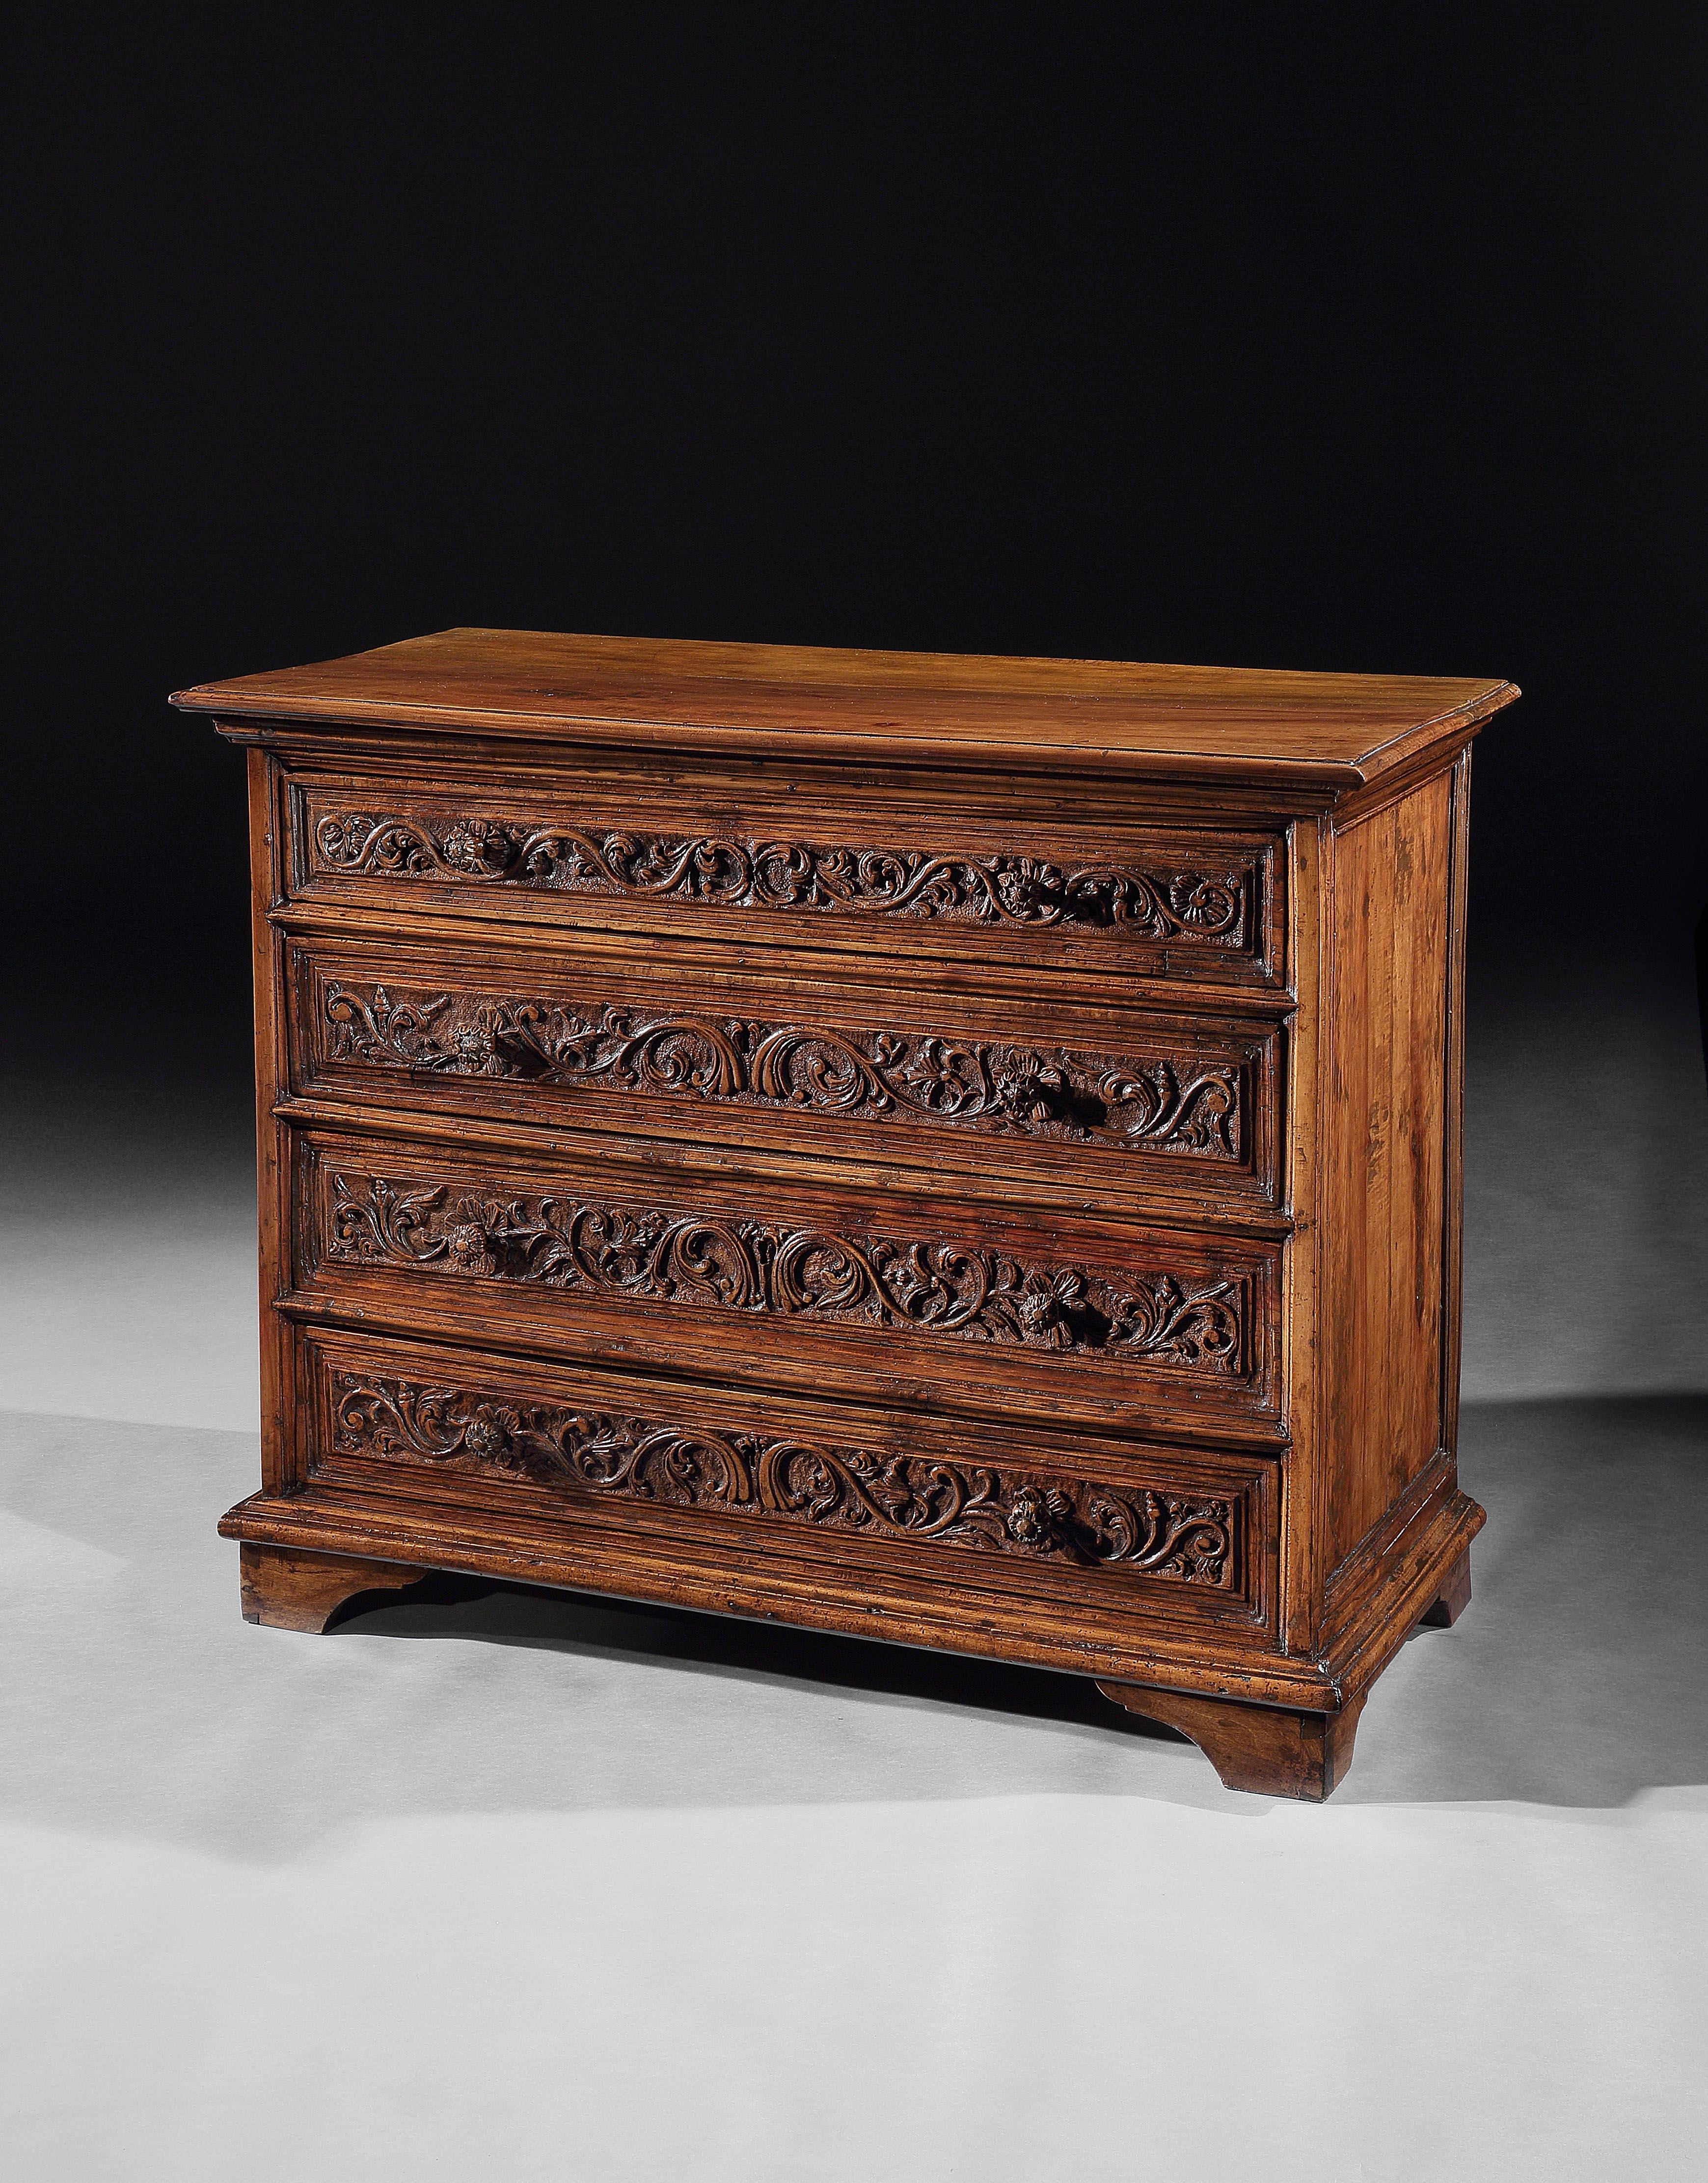 This rare cassettone oozes charm and character. The carved decoration is particular to Brescia in Lombardy and the knobs are a rare feature carved as flowerheads to the petals behind so that they become part of and blend into the carved decoration